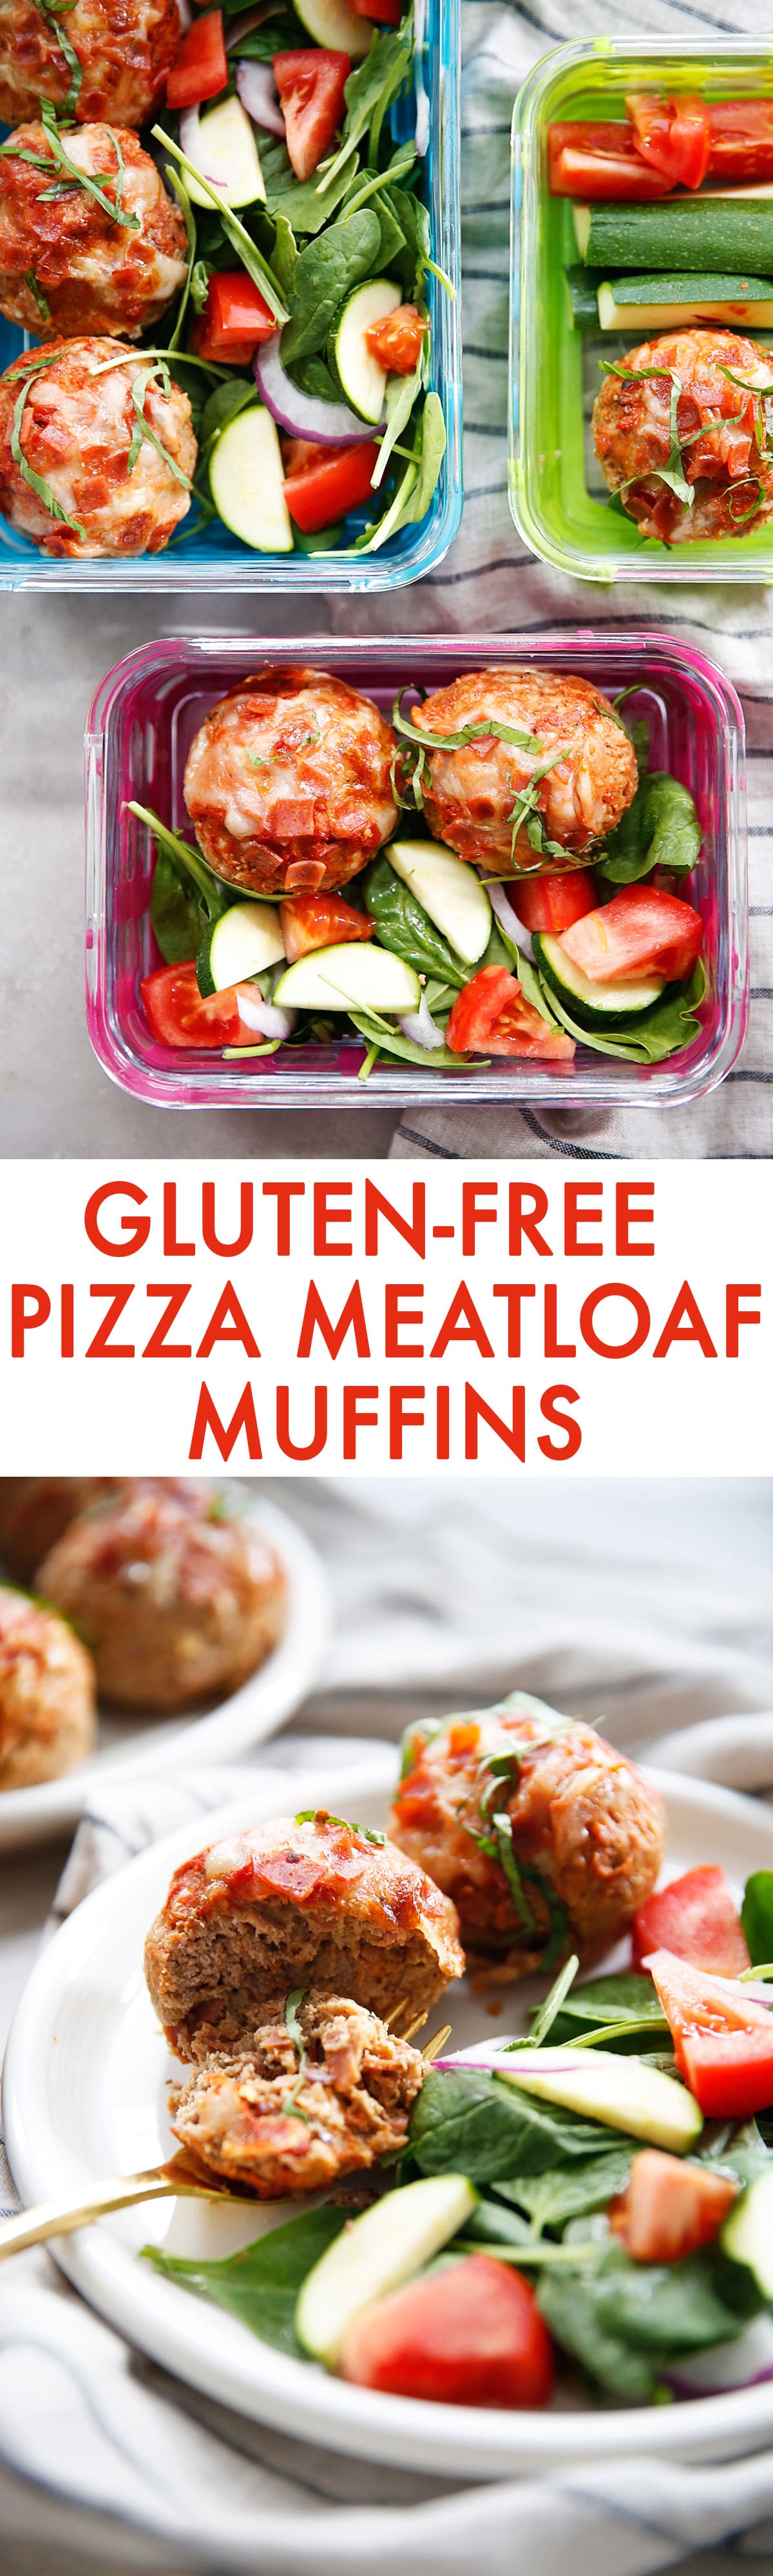 pizza meatloaf muffins (gluten-free)